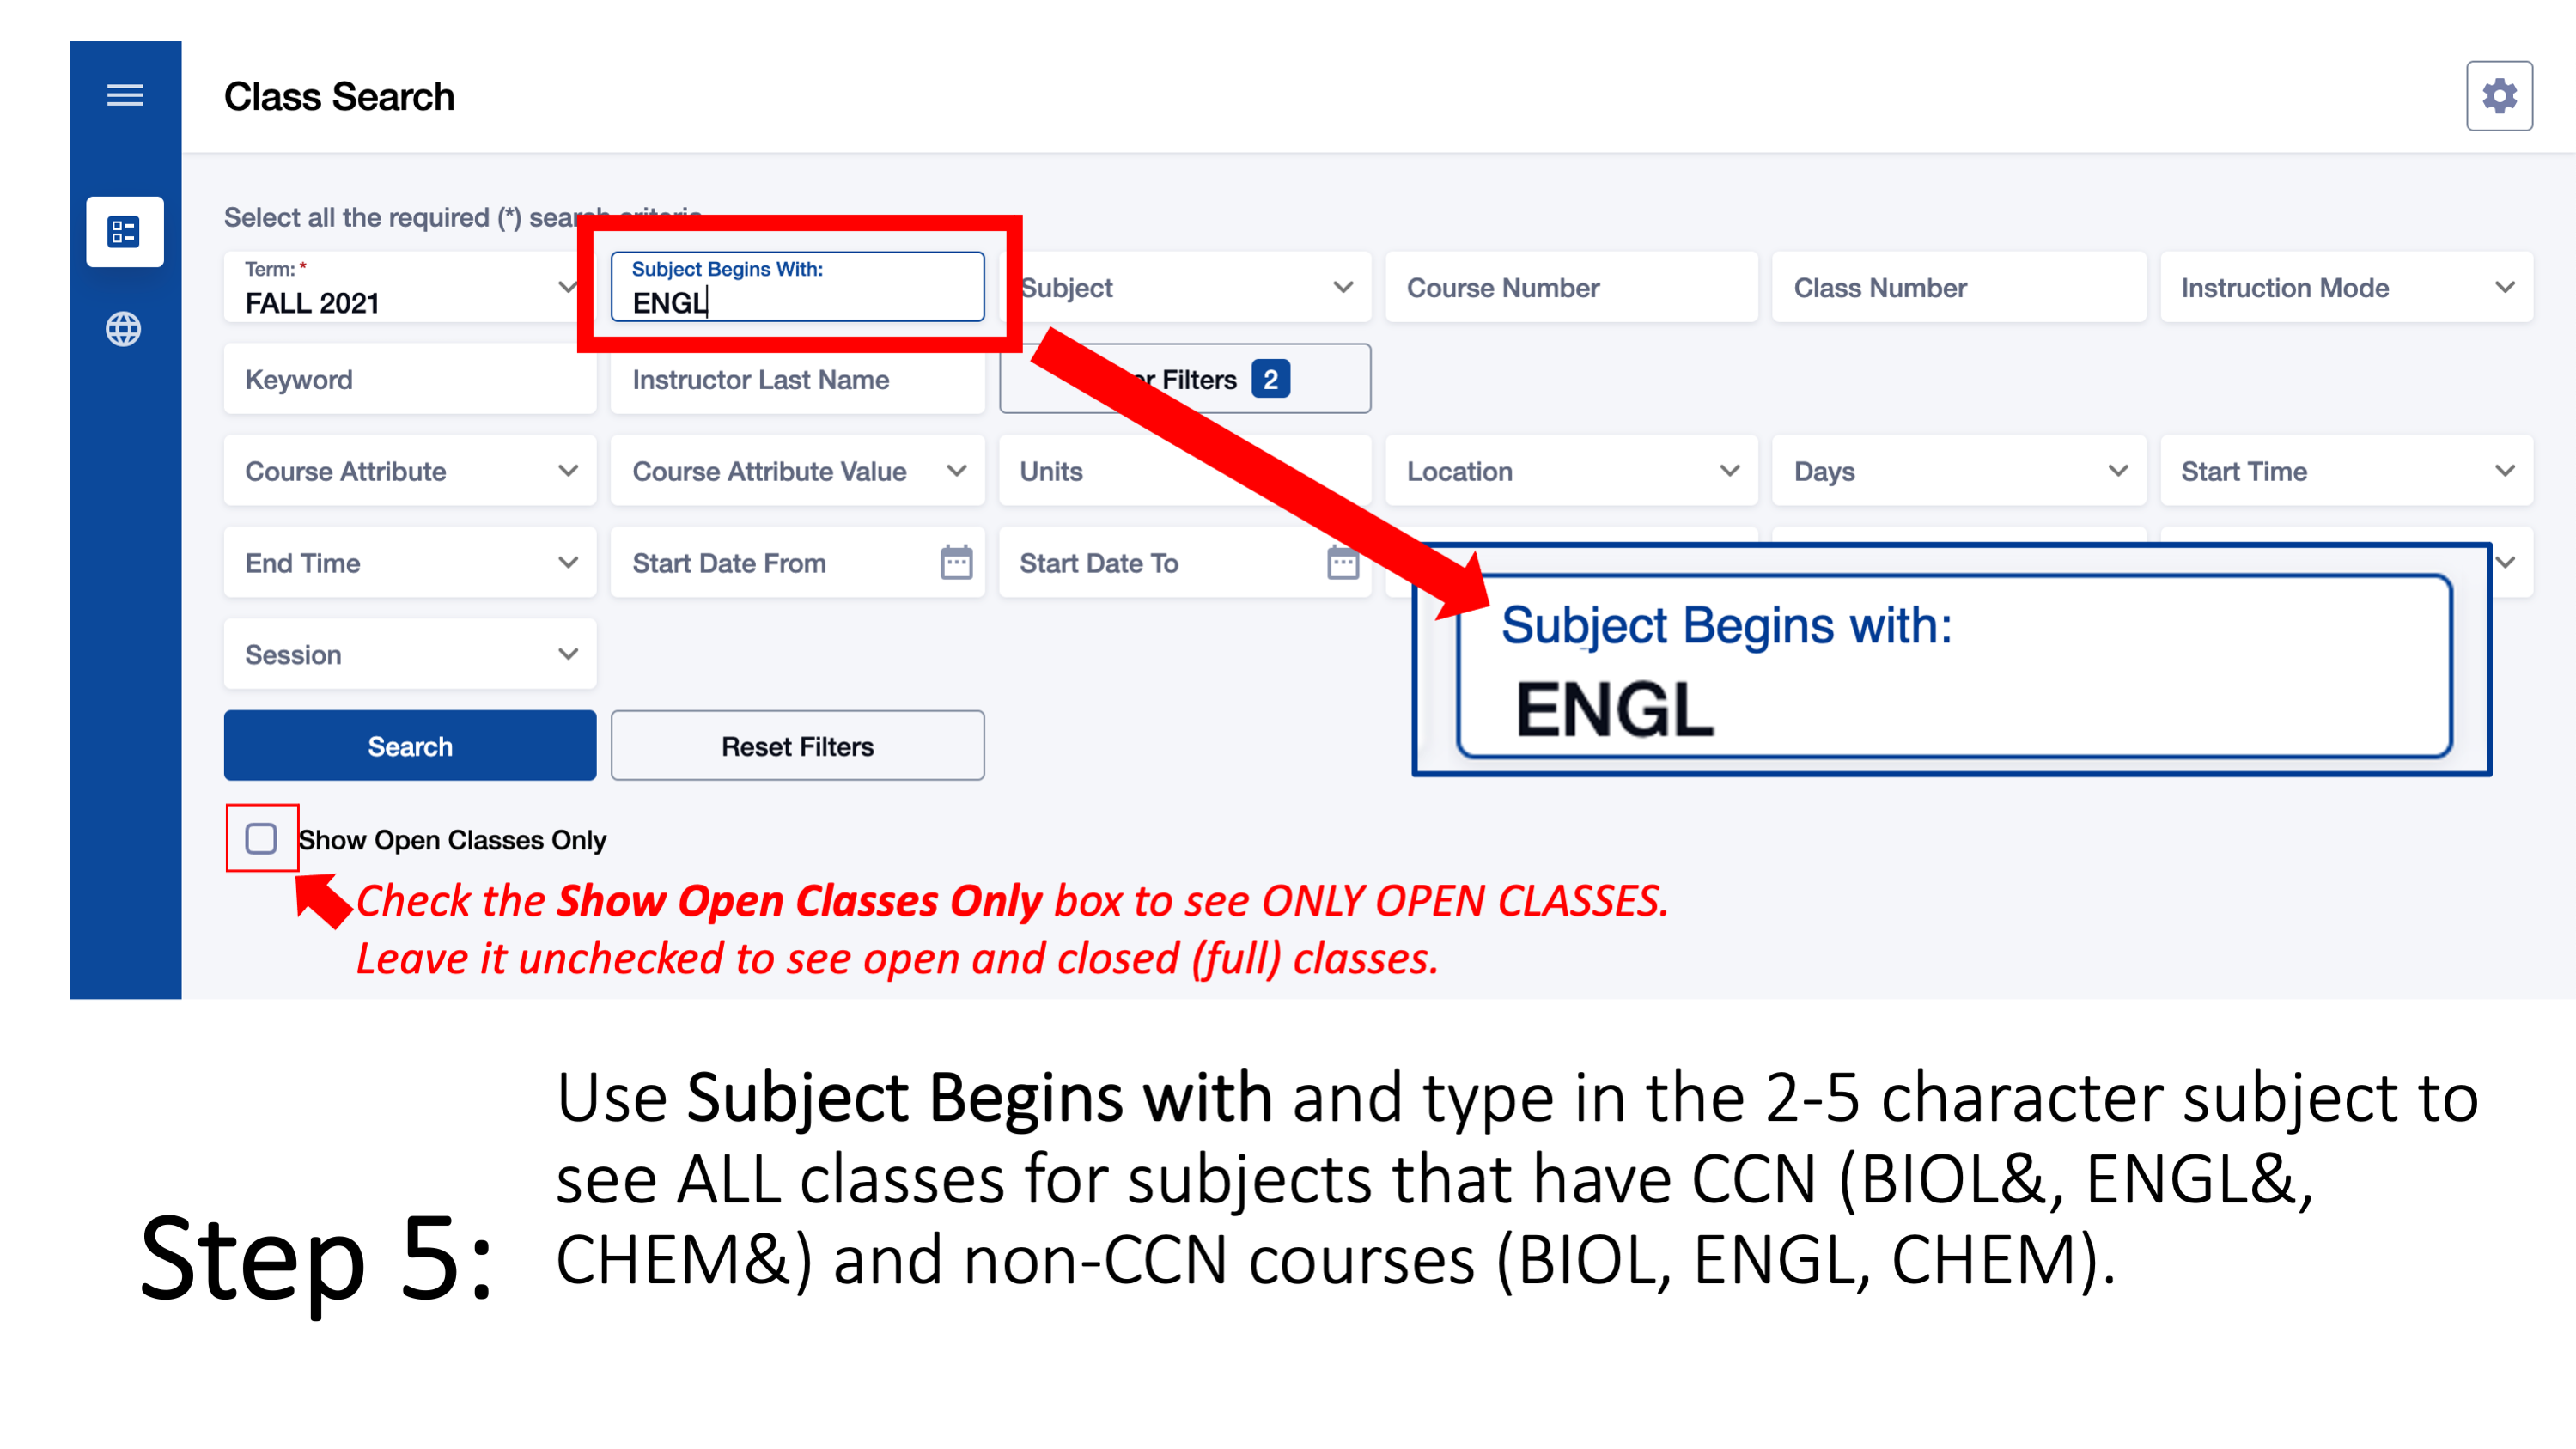 Step 5: Use Subject Begins with and type in the 2-5 character subject to see ALL classes for subjects that have CCN (BIOL&, ENGL&, CHEM&) and non-CCN courses (BIOL, ENGL, CHEM). Check the Show Open Classes Only box to see ONLY OPEN CLASSES. Leave it unchecked to see open and closed (full) classes. 